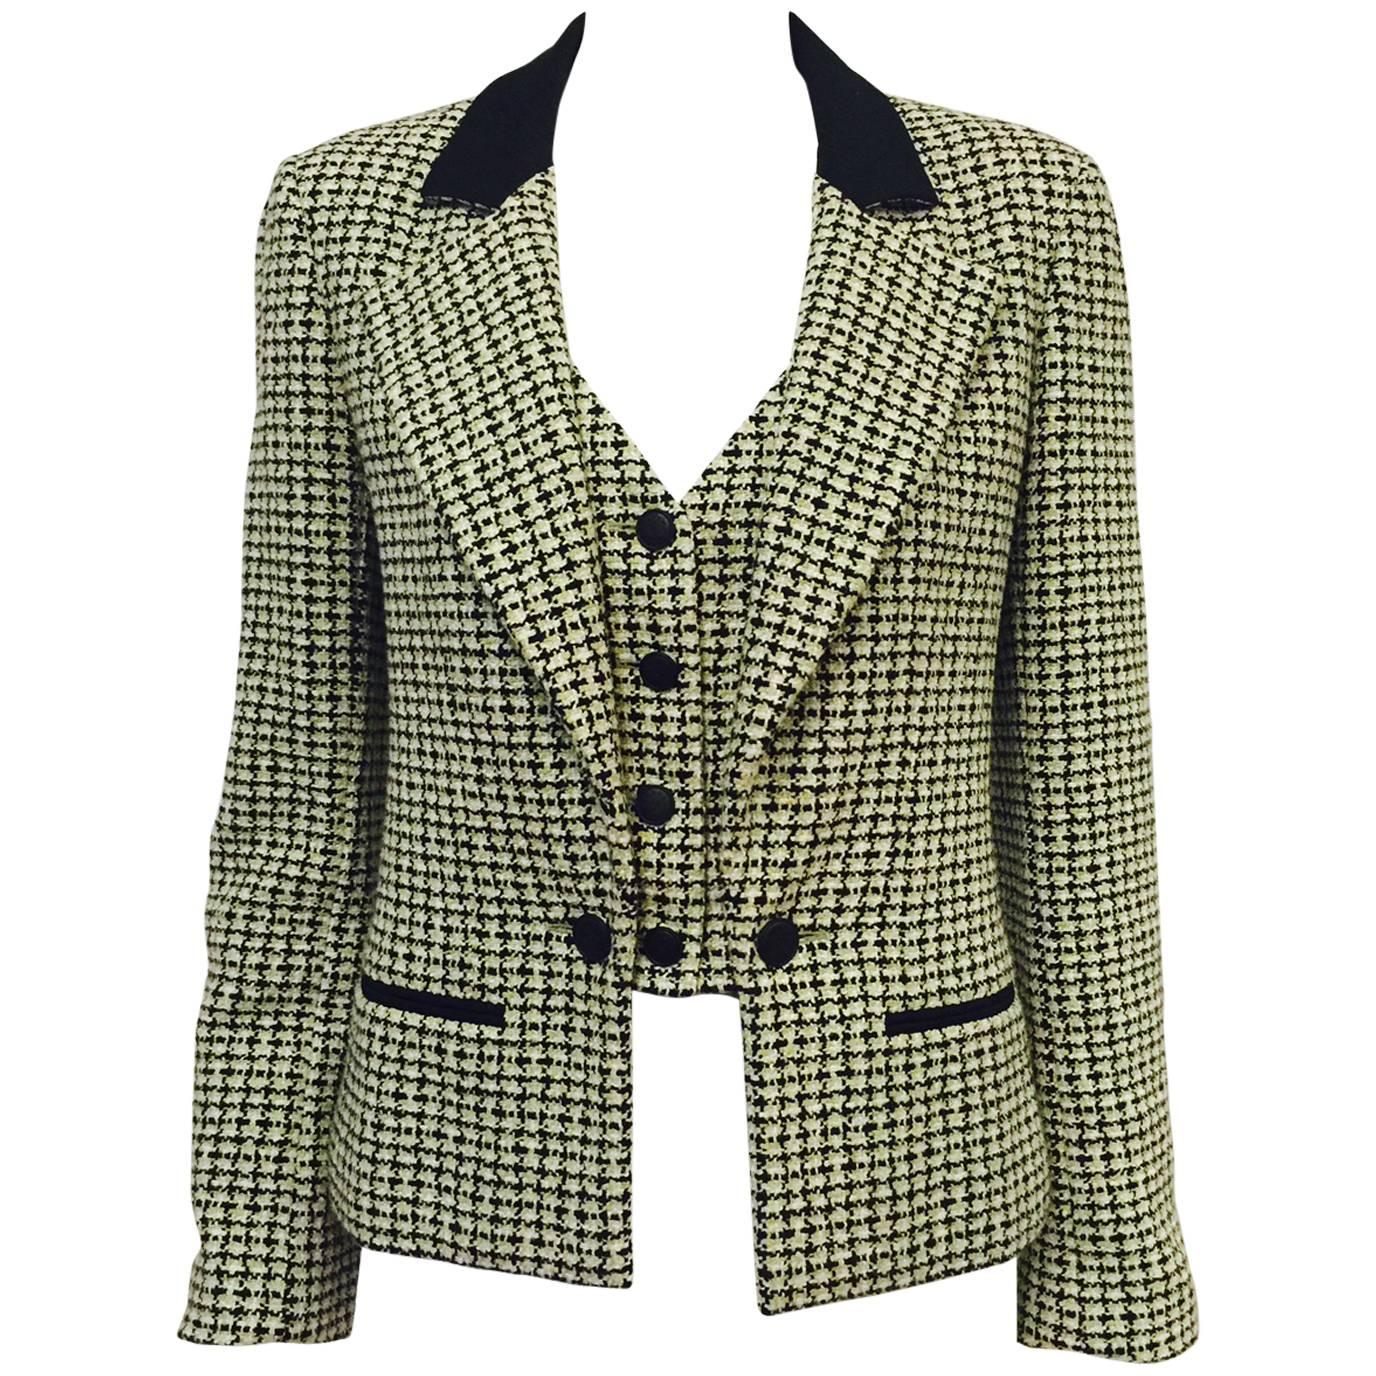 Chanel Spring 2002 Houndstooth Cotton Tweed Jacket With Incorporated Vest For Sale